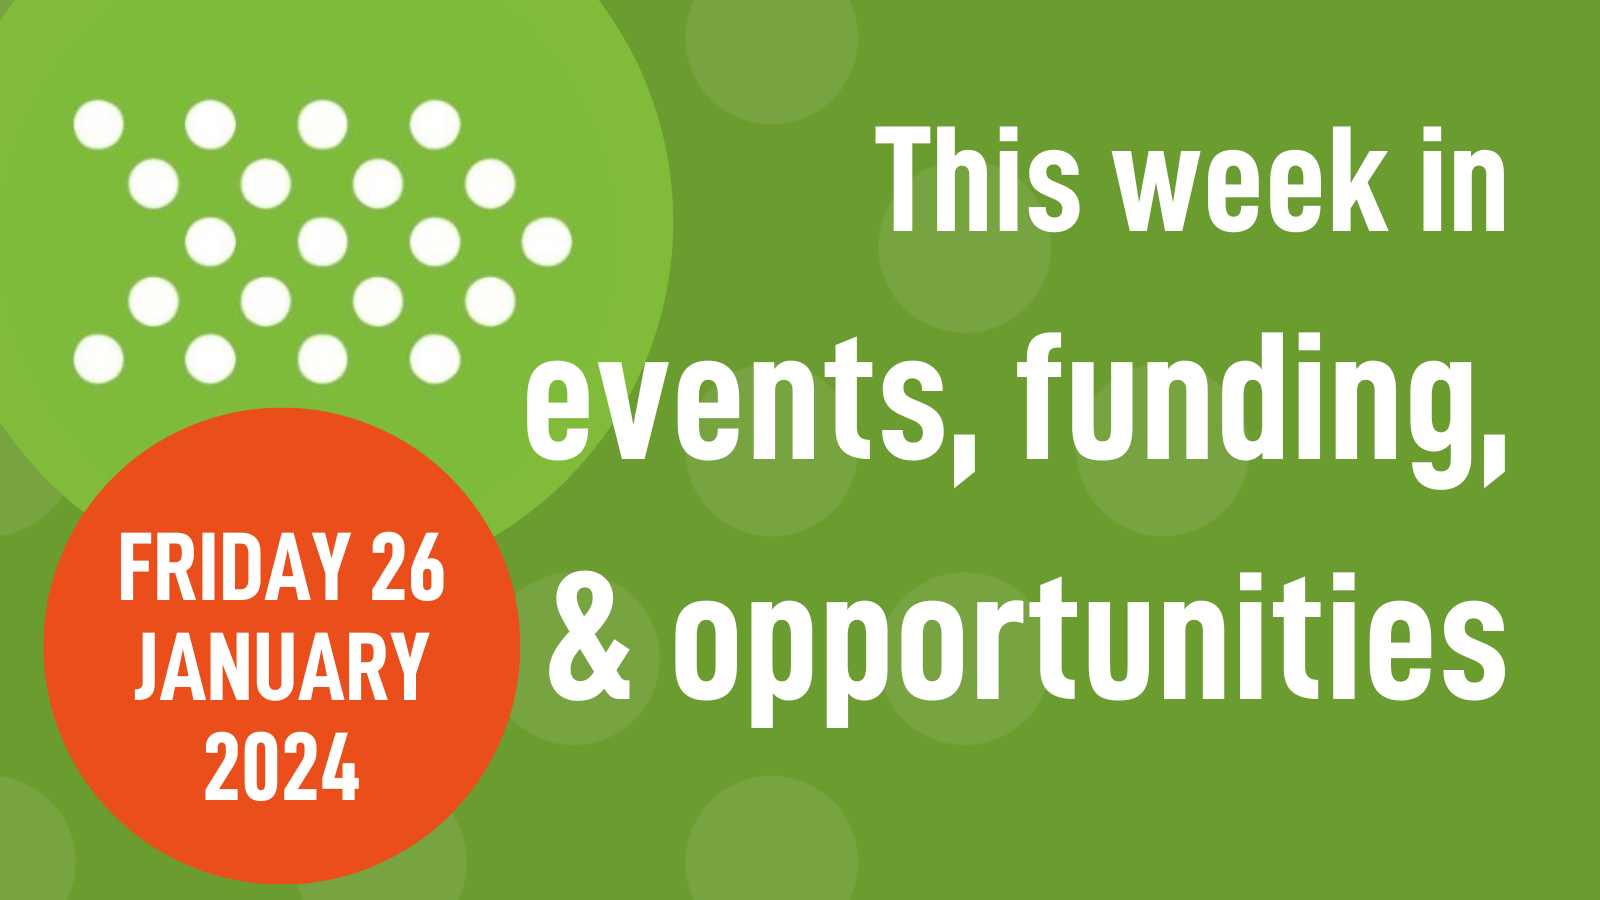 Weekly roundup 26/01/24: events, funding, & opportunities in mental health research